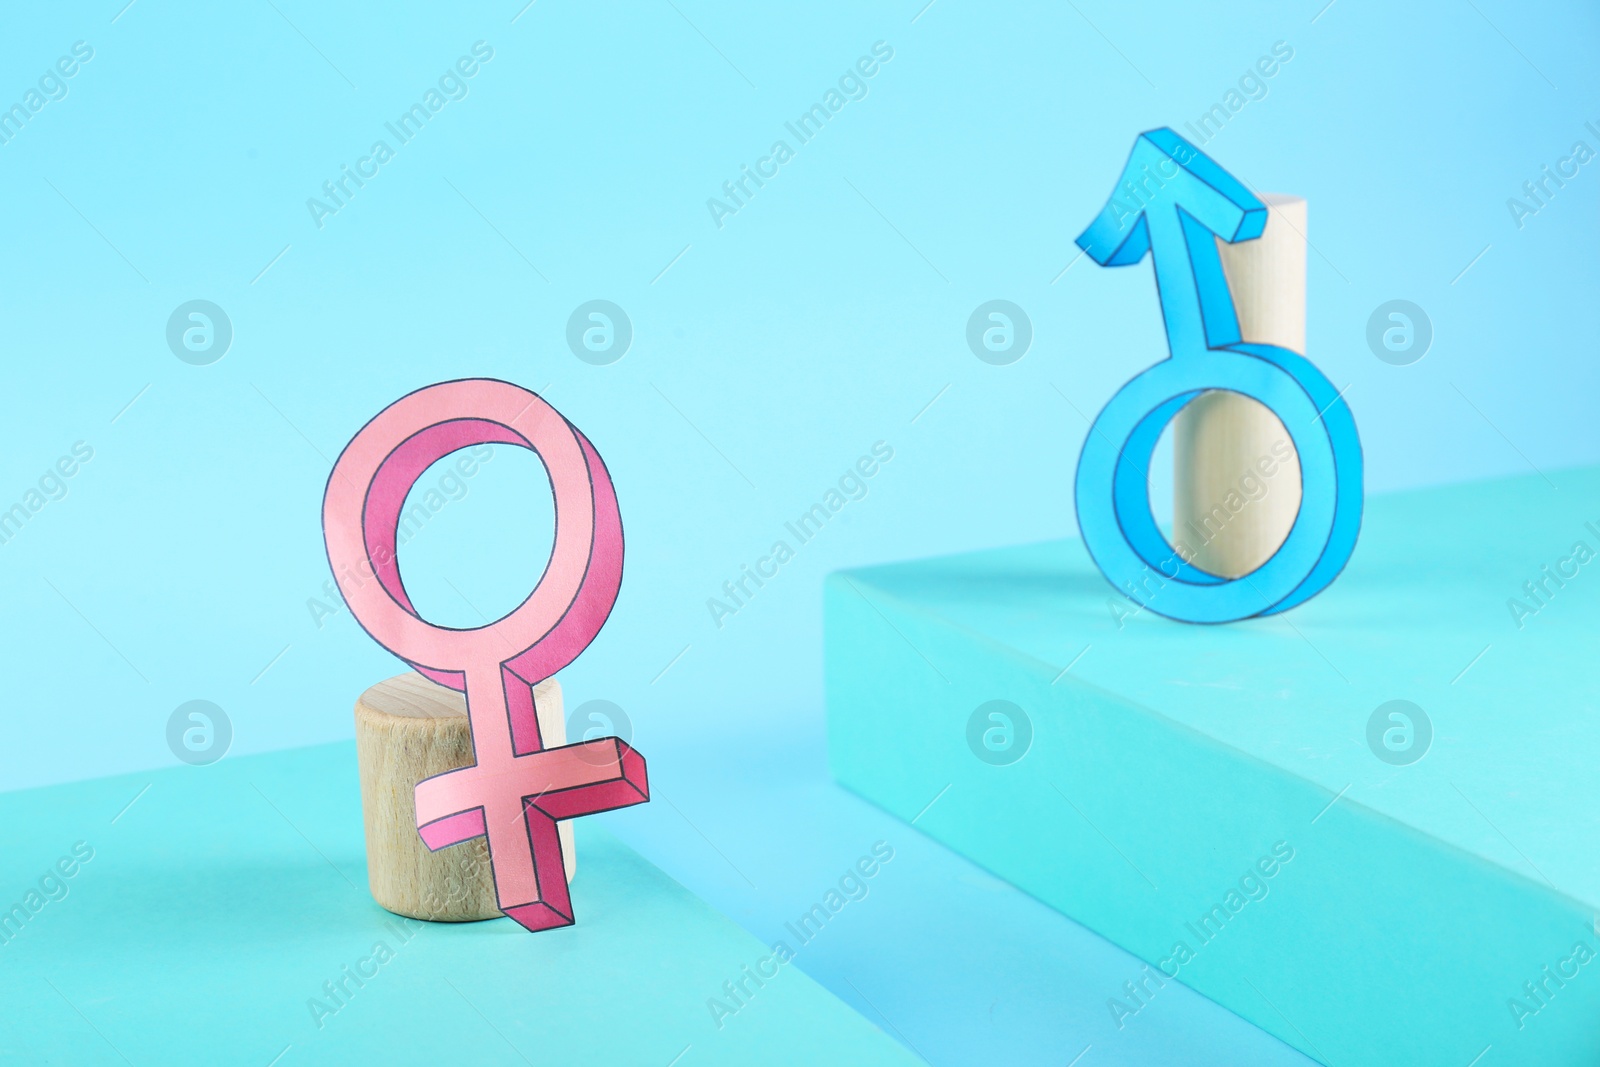 Photo of Gender pay gap. Male and female symbols on light blue background